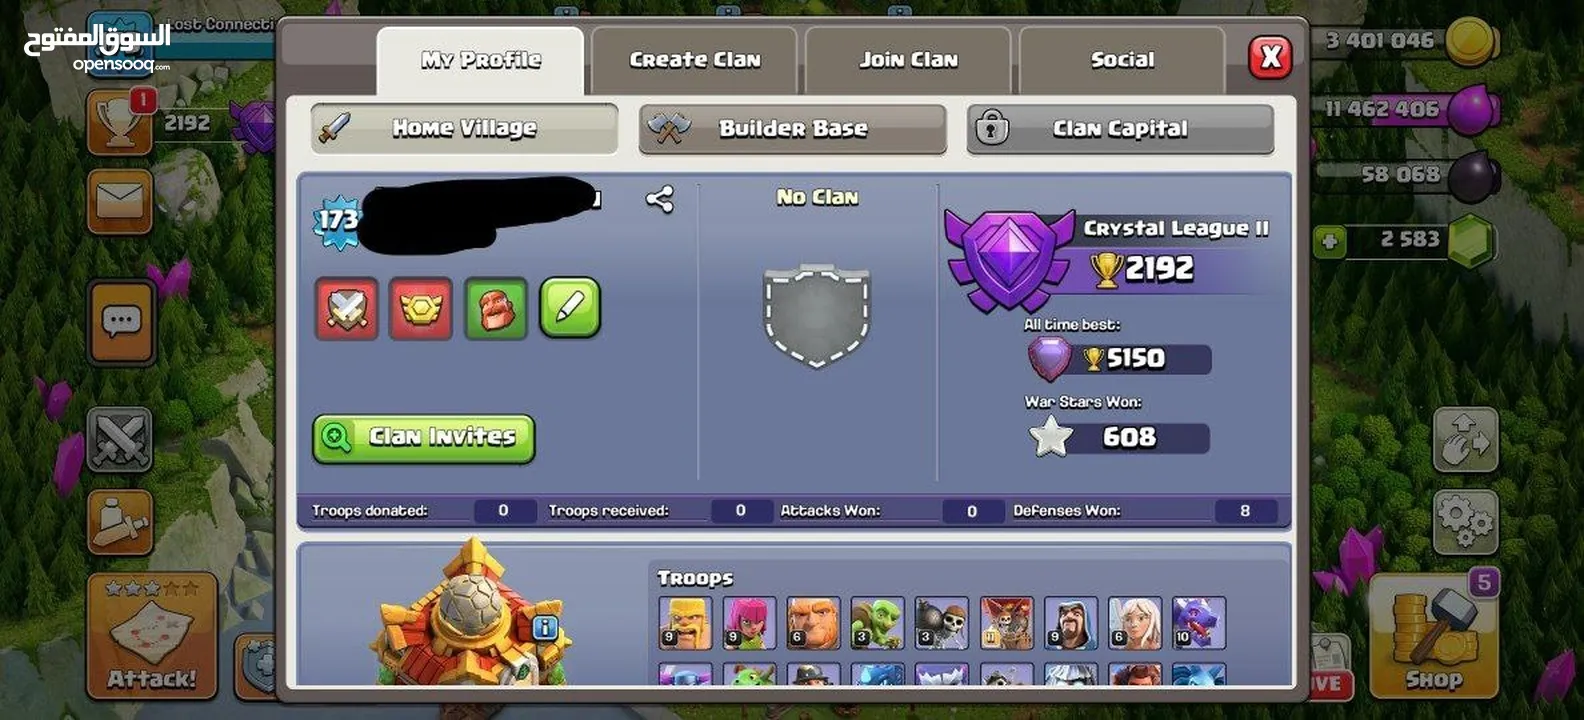 [5 Star Town Hall 16 - One Max Ability]  One Pet Max , 608 War Stars , 700+ Medals